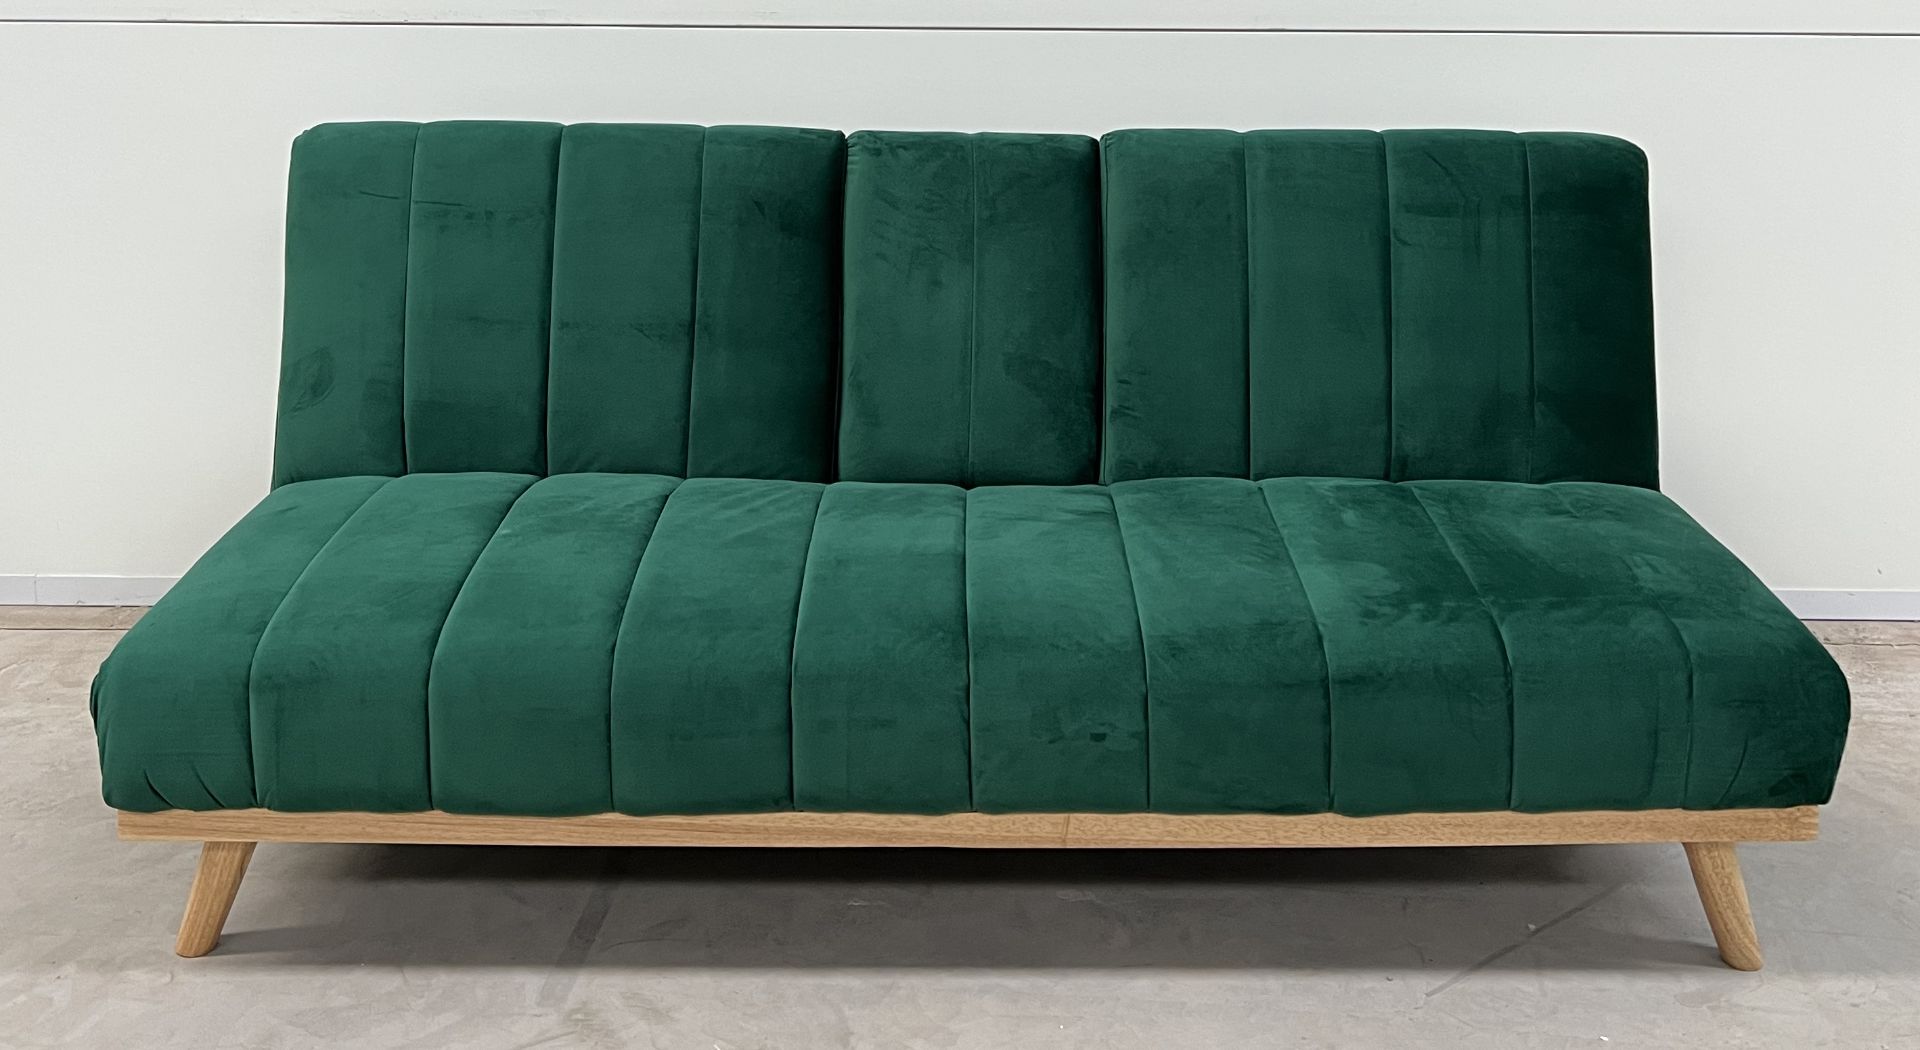 Etta Green Velvet 3 Seater Fold Down Sofa Bed Combines An Exciting Contemporary Shape With